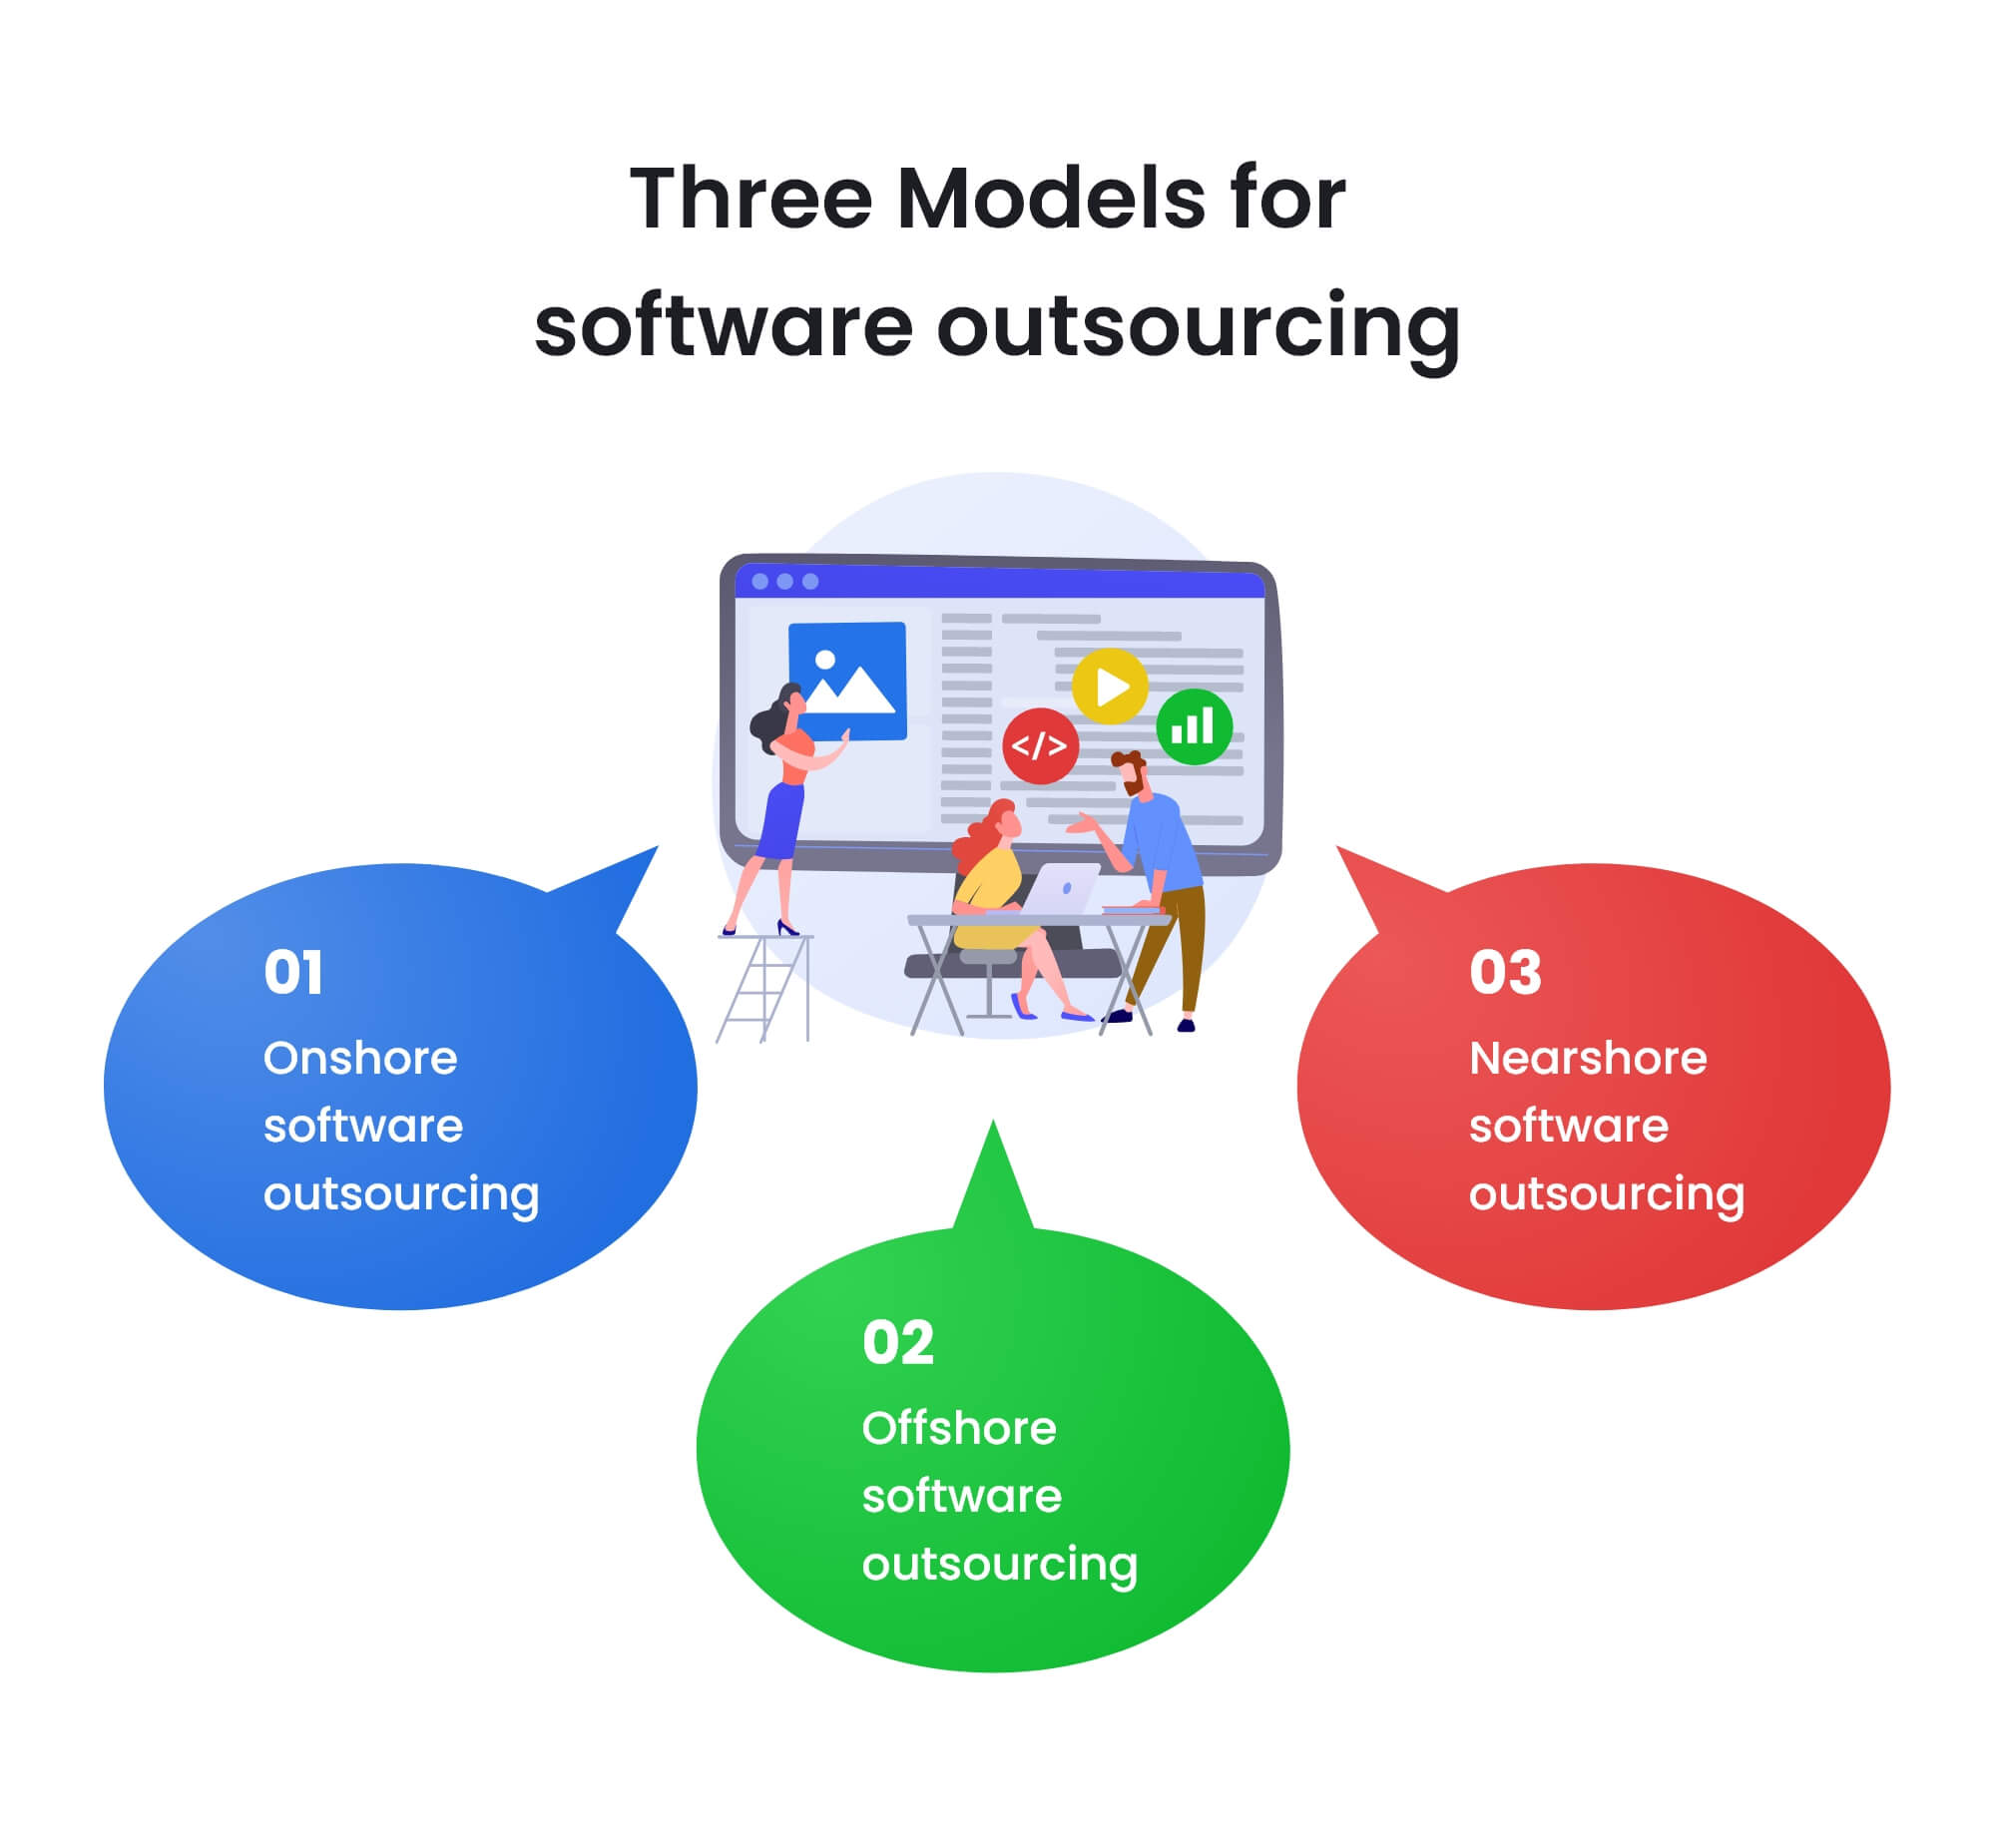 Software outsource models